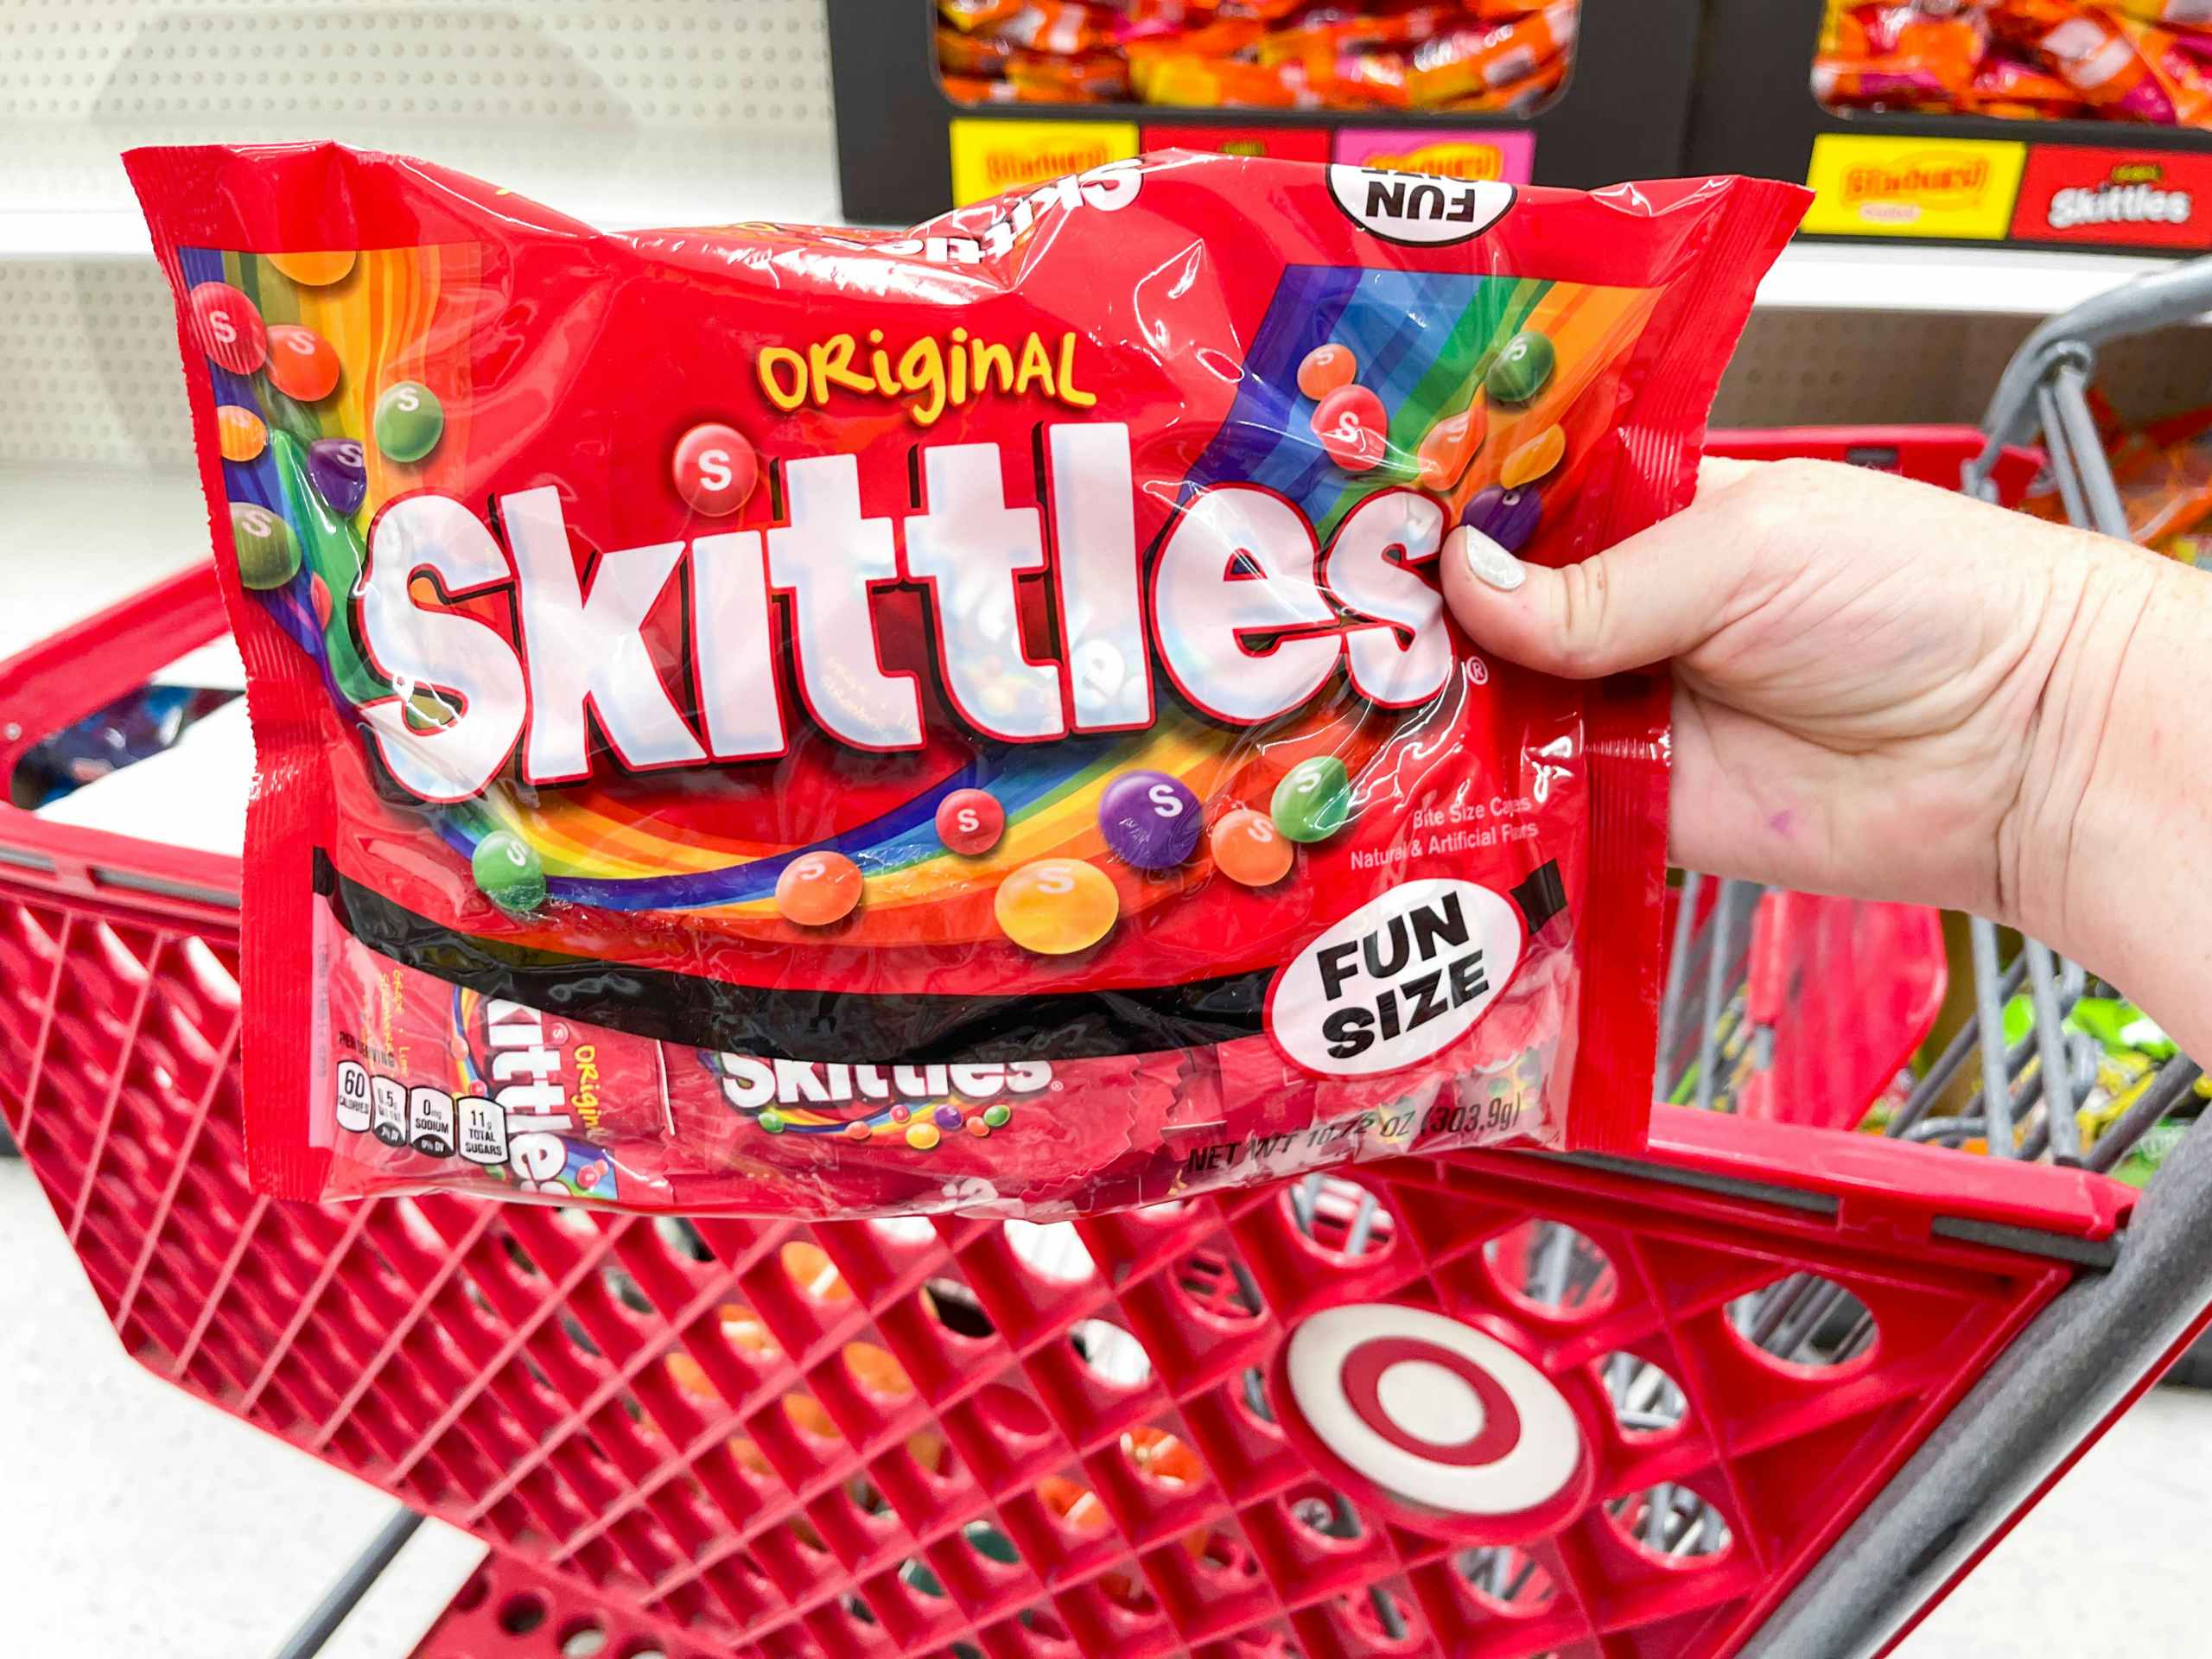 a person holding skittles in store by cart